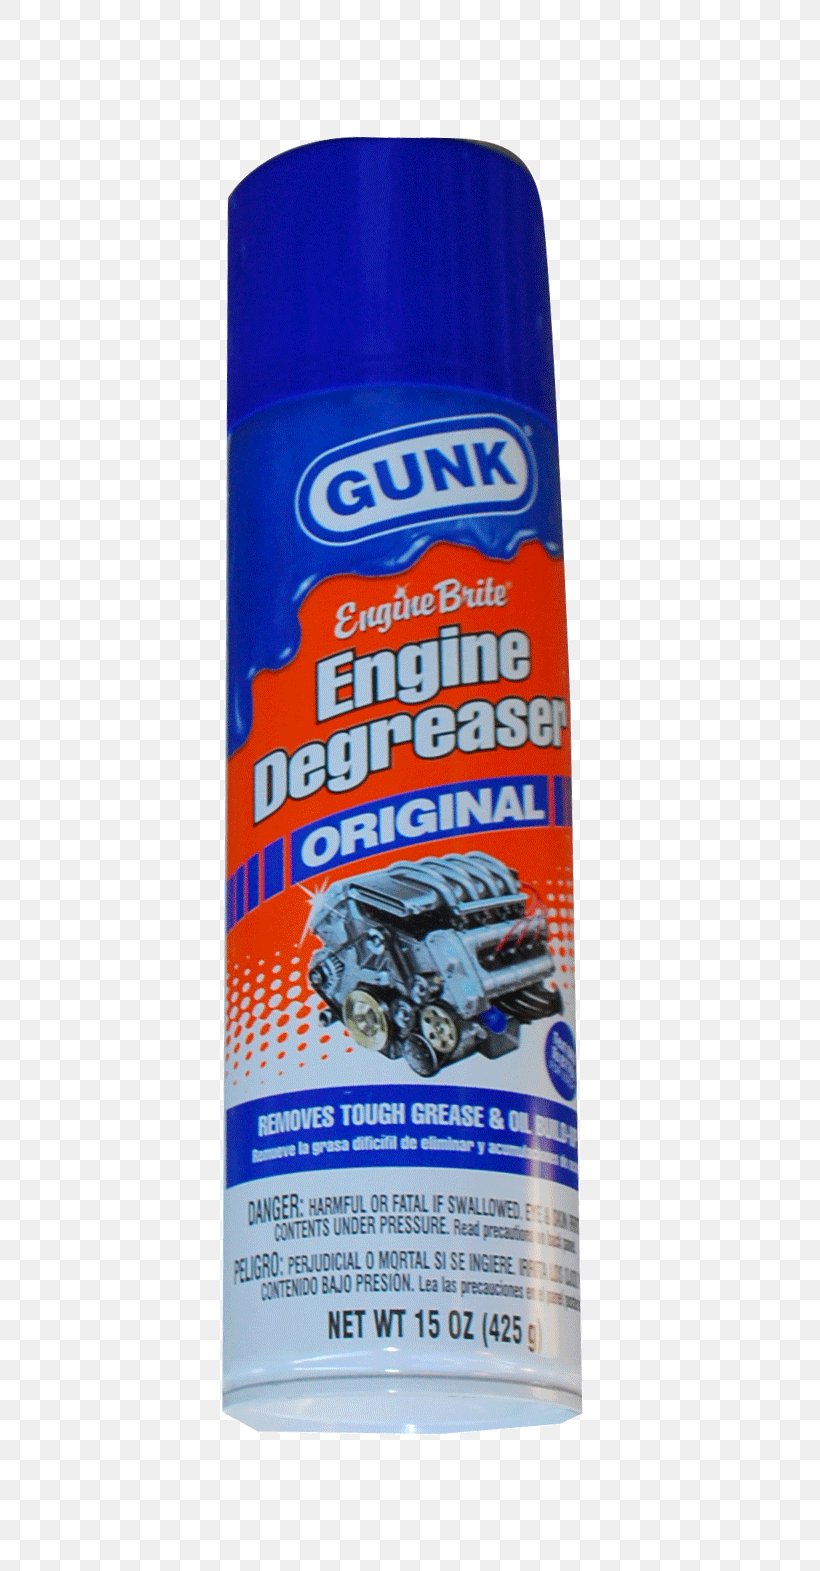 Lubricant Engine Ounce Bottle, PNG, 601x1571px, Lubricant, Bottle, Engine, Ounce, Spray Download Free